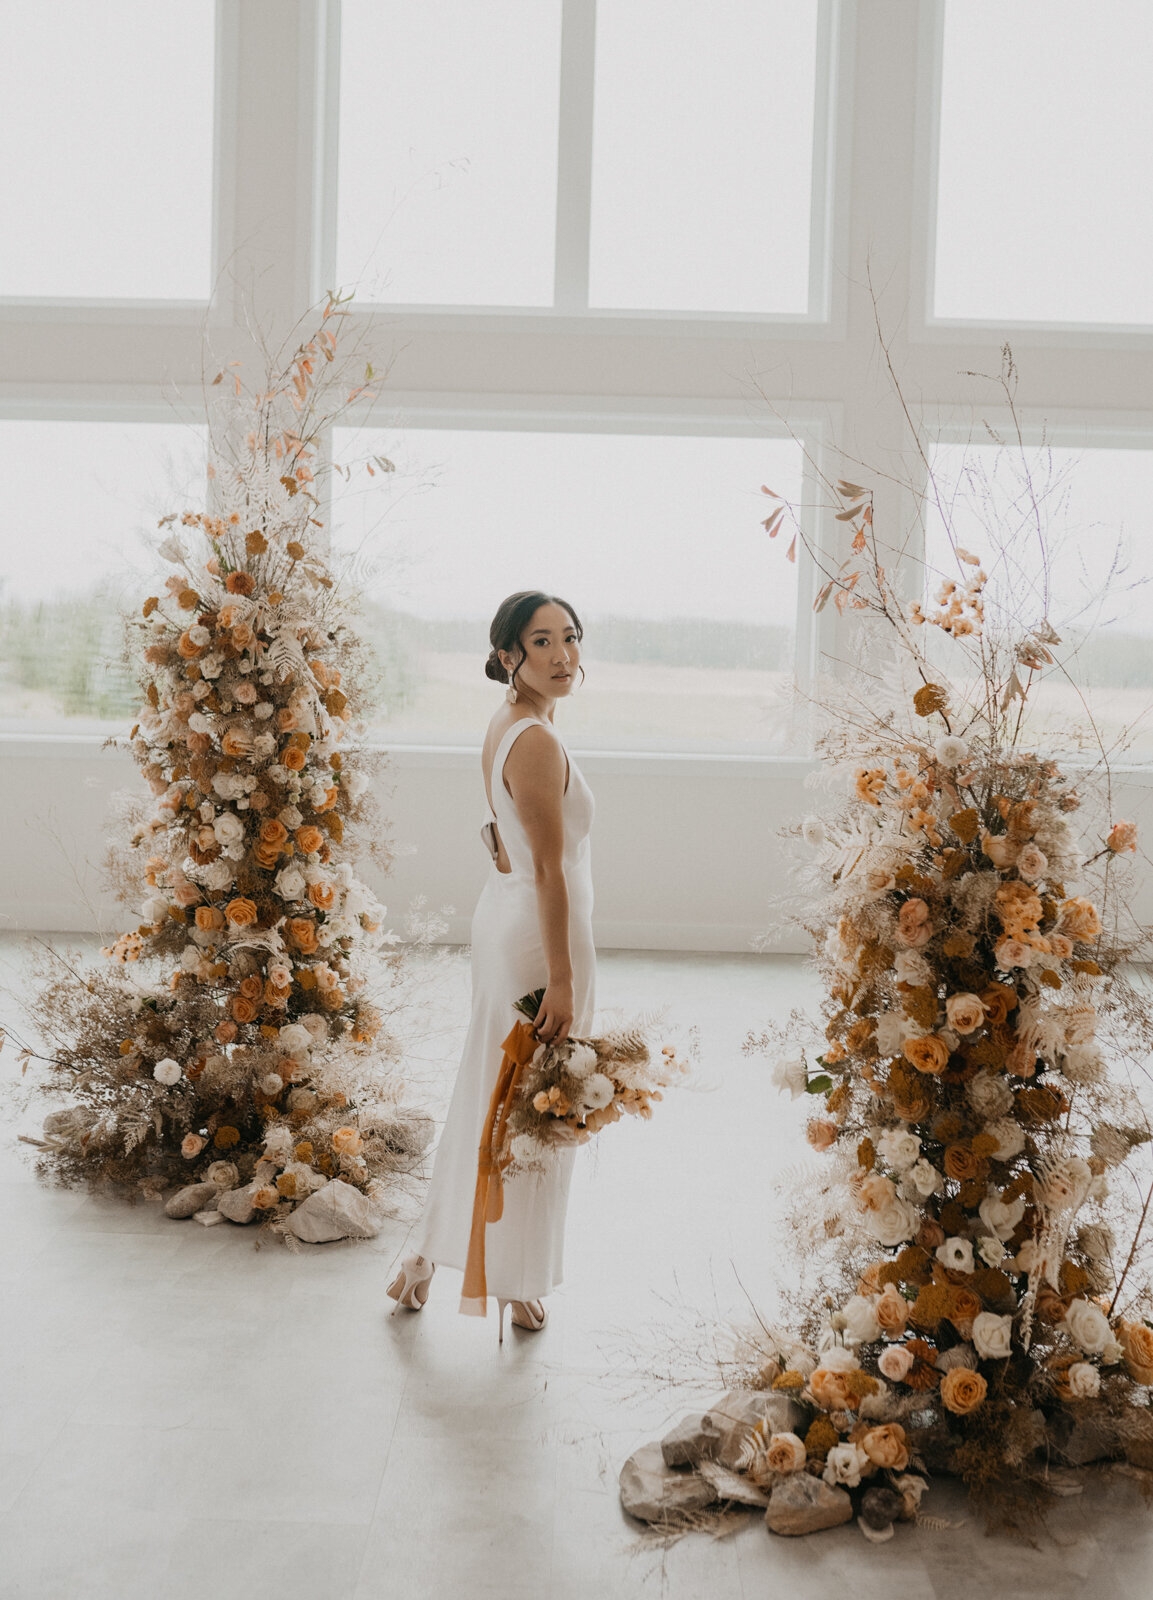 Elegant fall bridals at Tin Roof Event Centre, a modern wedding venue in Lacombe, Alberta, featured on the Brontë Bride Vendor Guide.